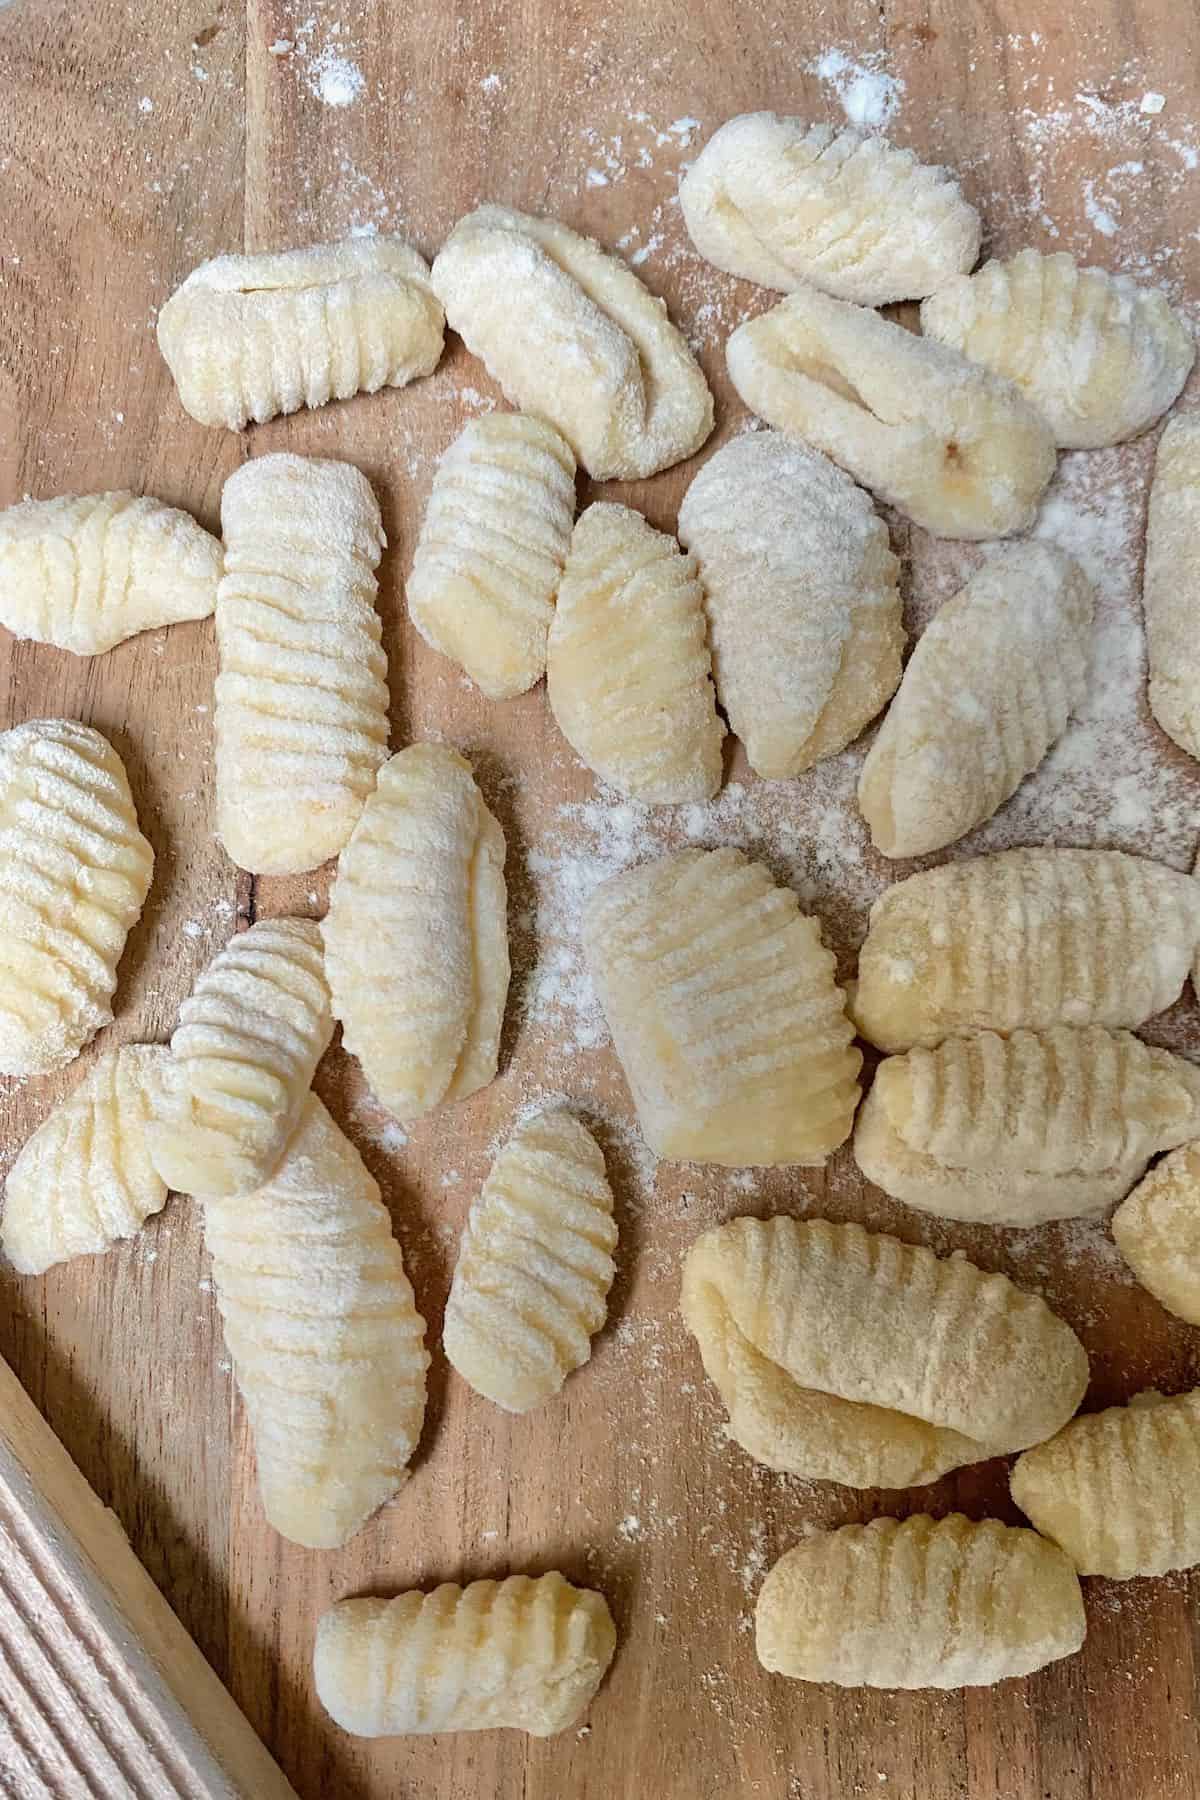 Different shapes of gnocchi